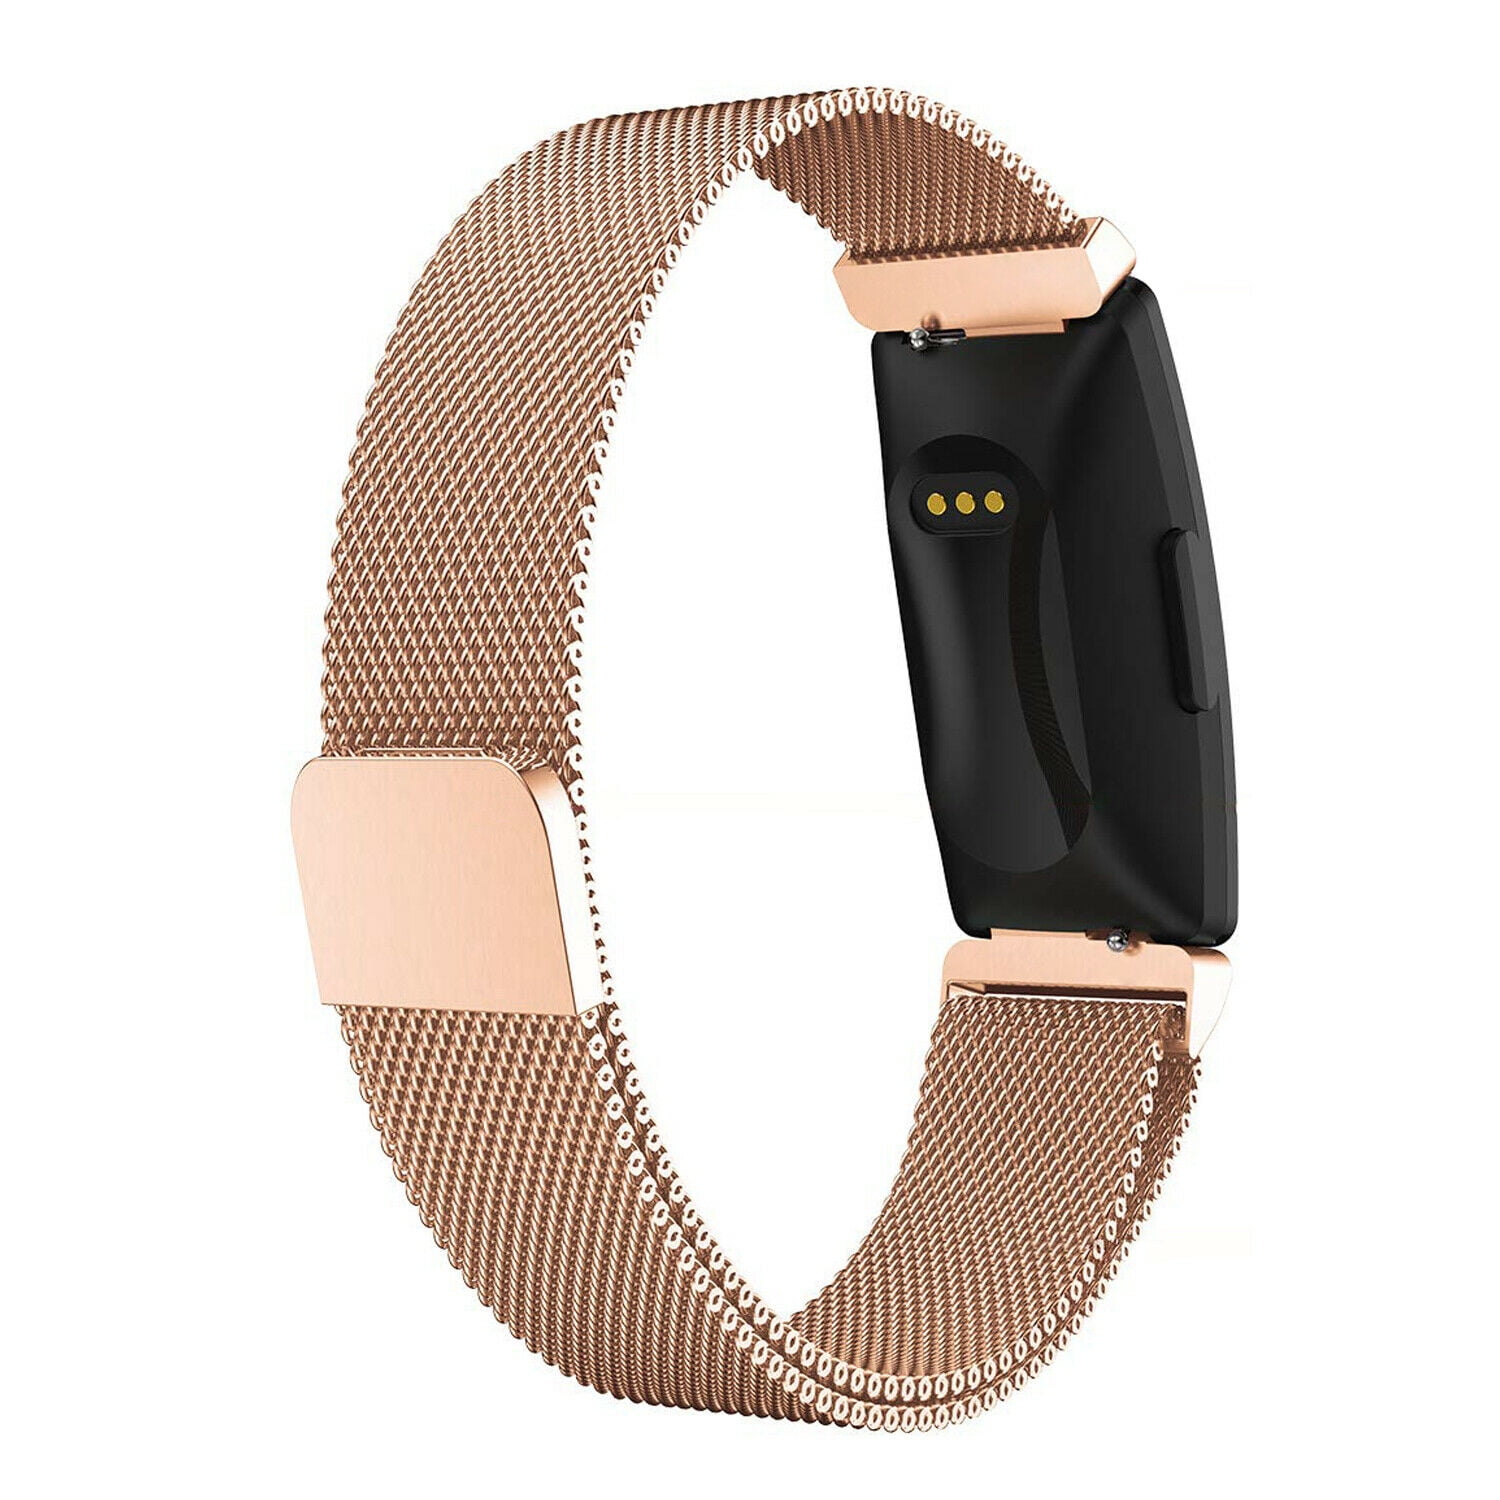 Inspire Bands Stainless Steel Metal Replacement Strap Wrist Band Accessories for Fitbit Inspire Women Man Large Small Shangpule Compatible for Fitbit Inspire HR/Inspire 2 